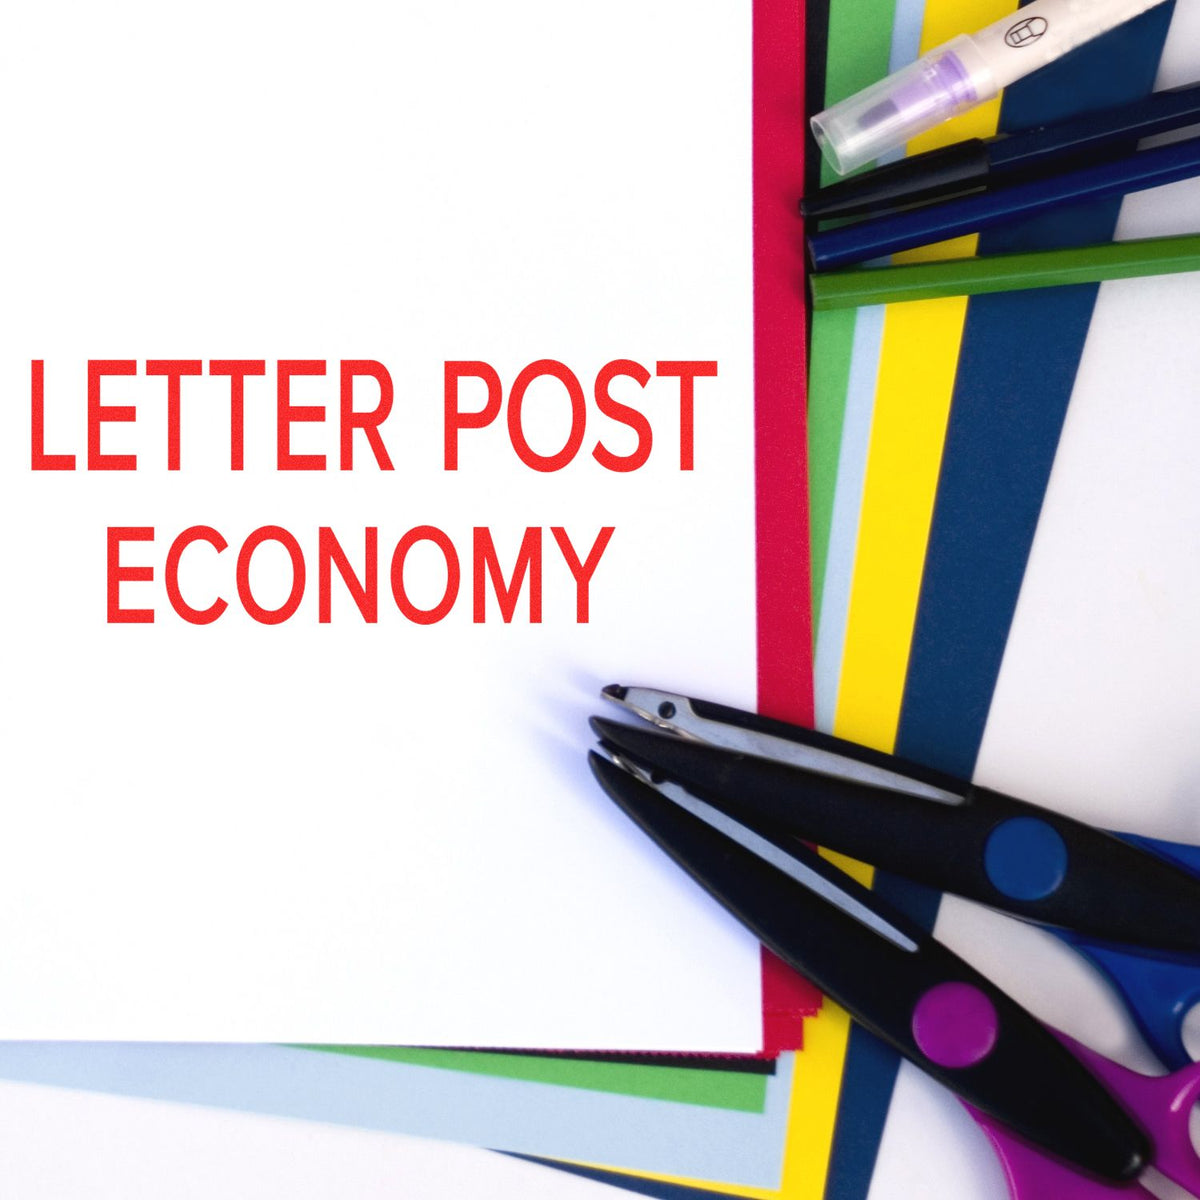 Large Pre-Inked Letter Post Economy Stamp In Use Photo